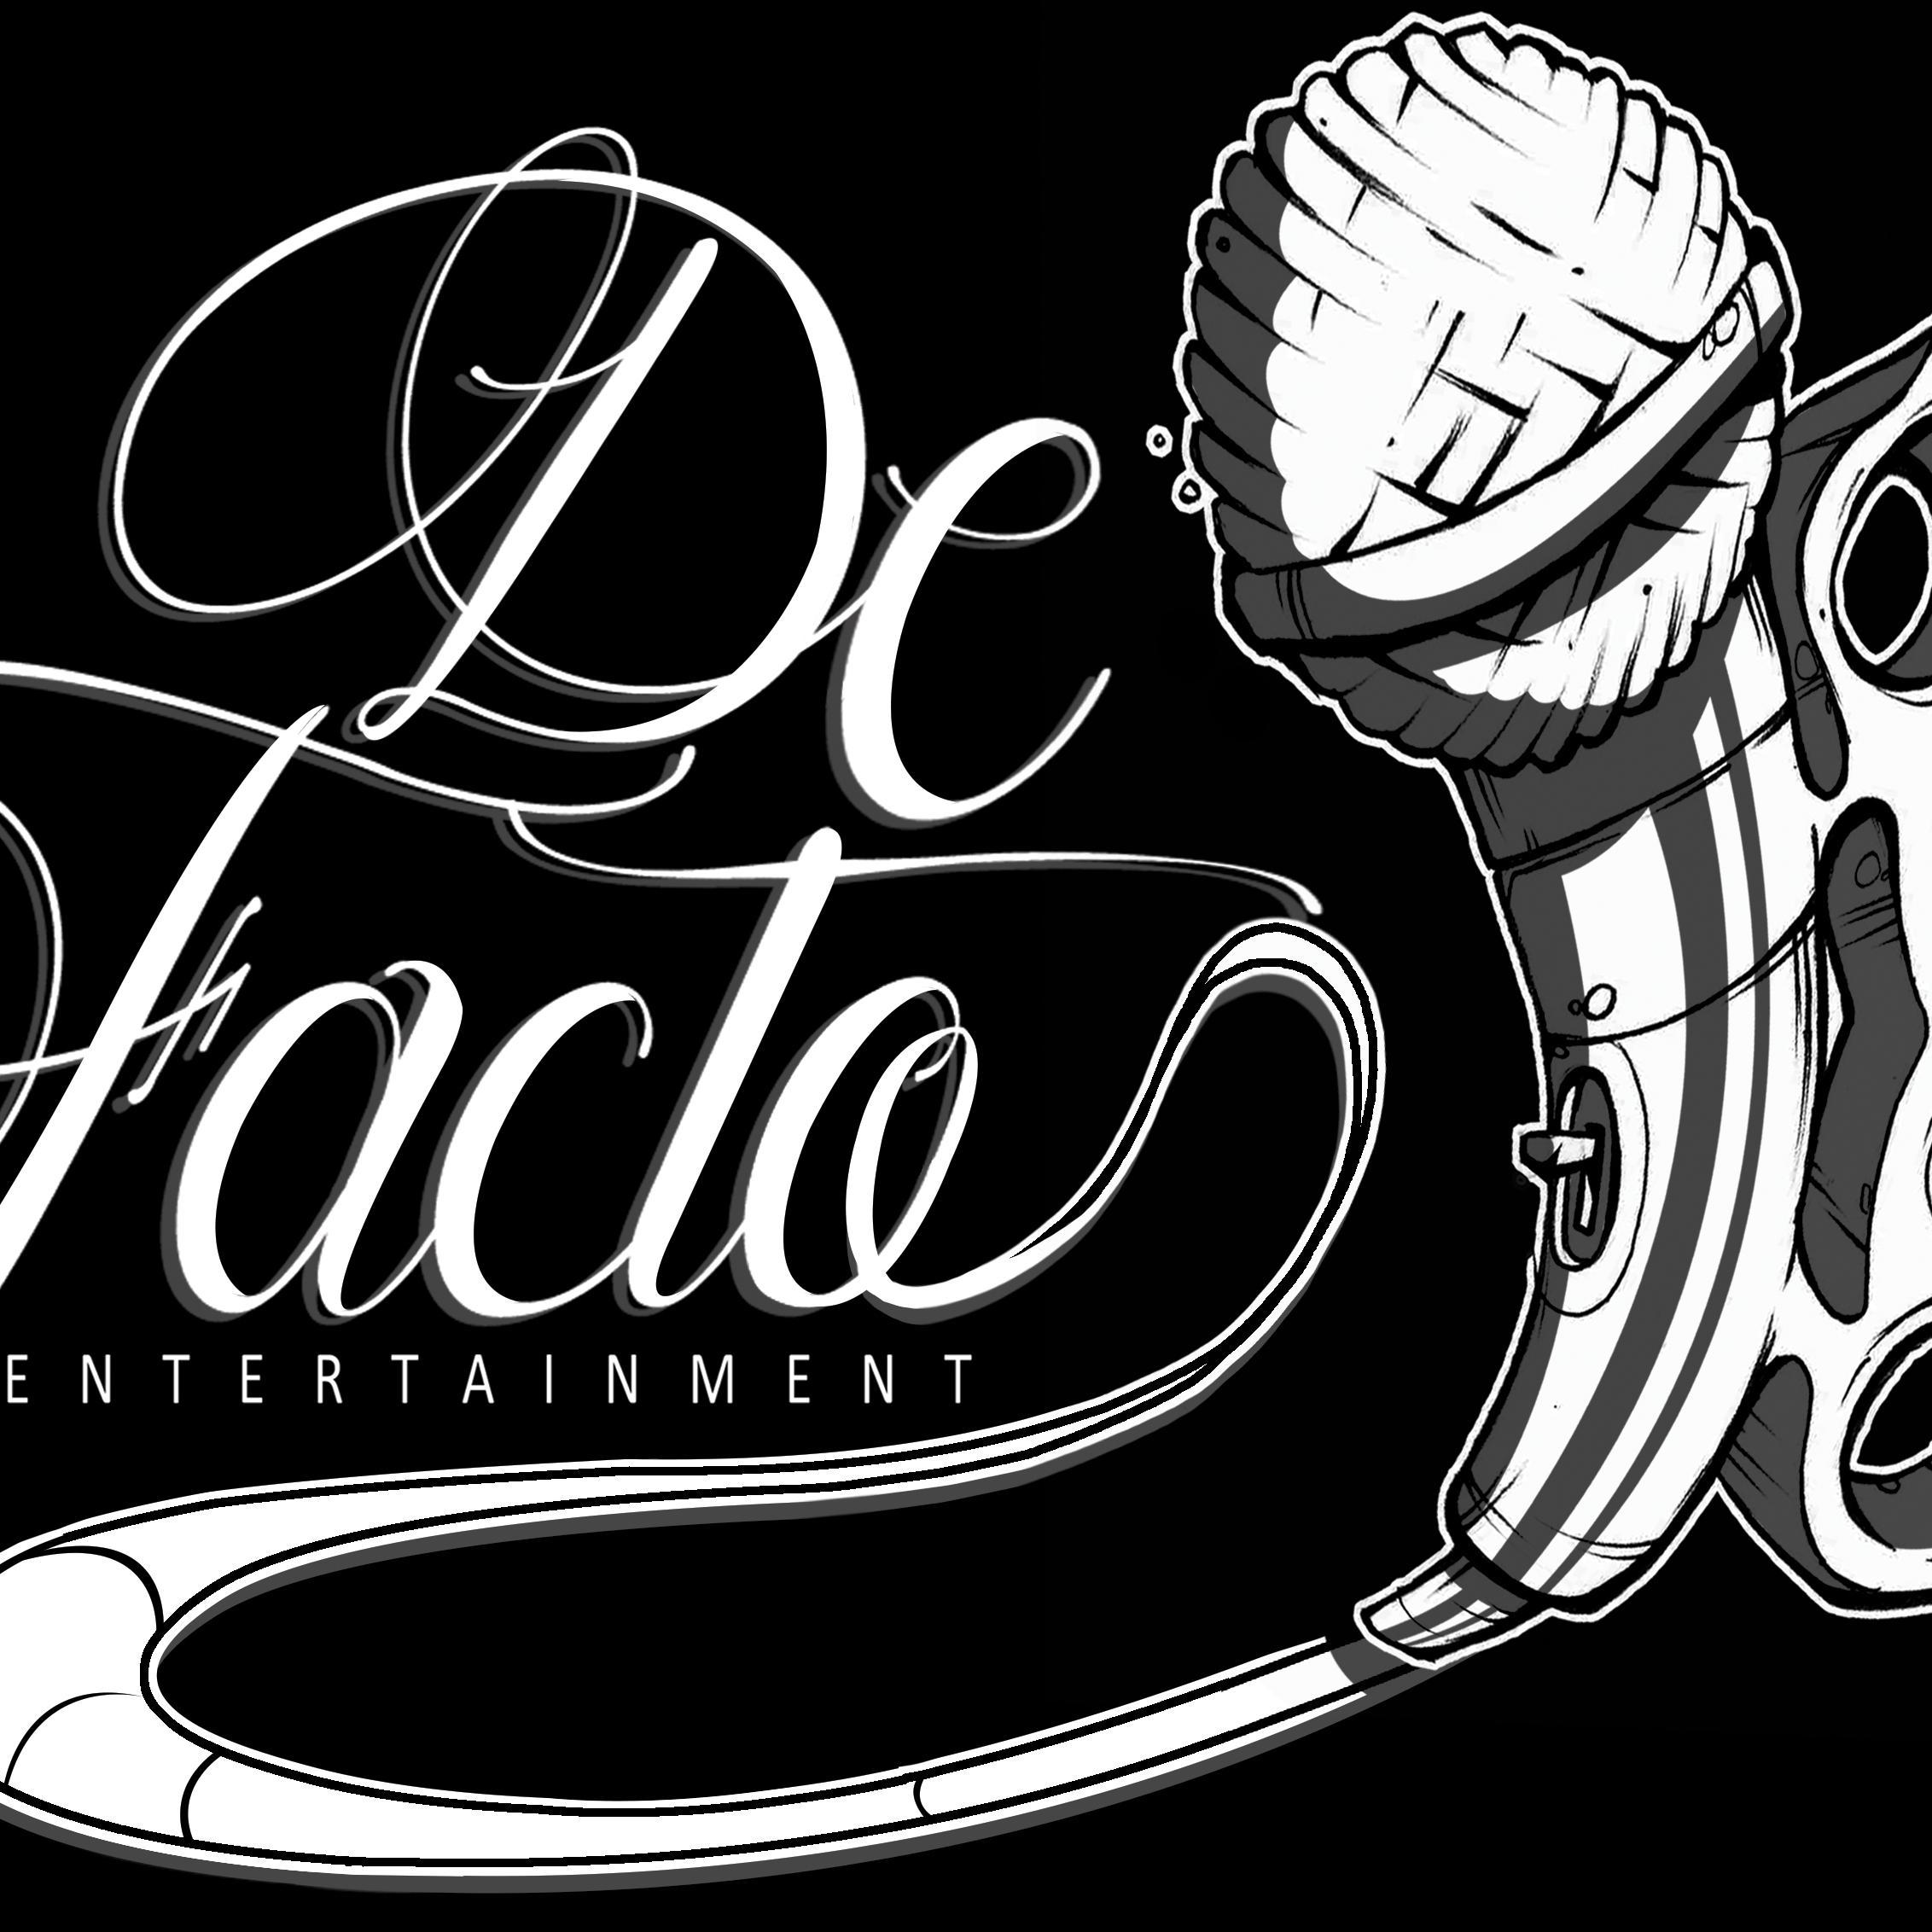 De Facto Entertainment is a UK based hip hop label focusing on releasing music influenced by the golden era of rap